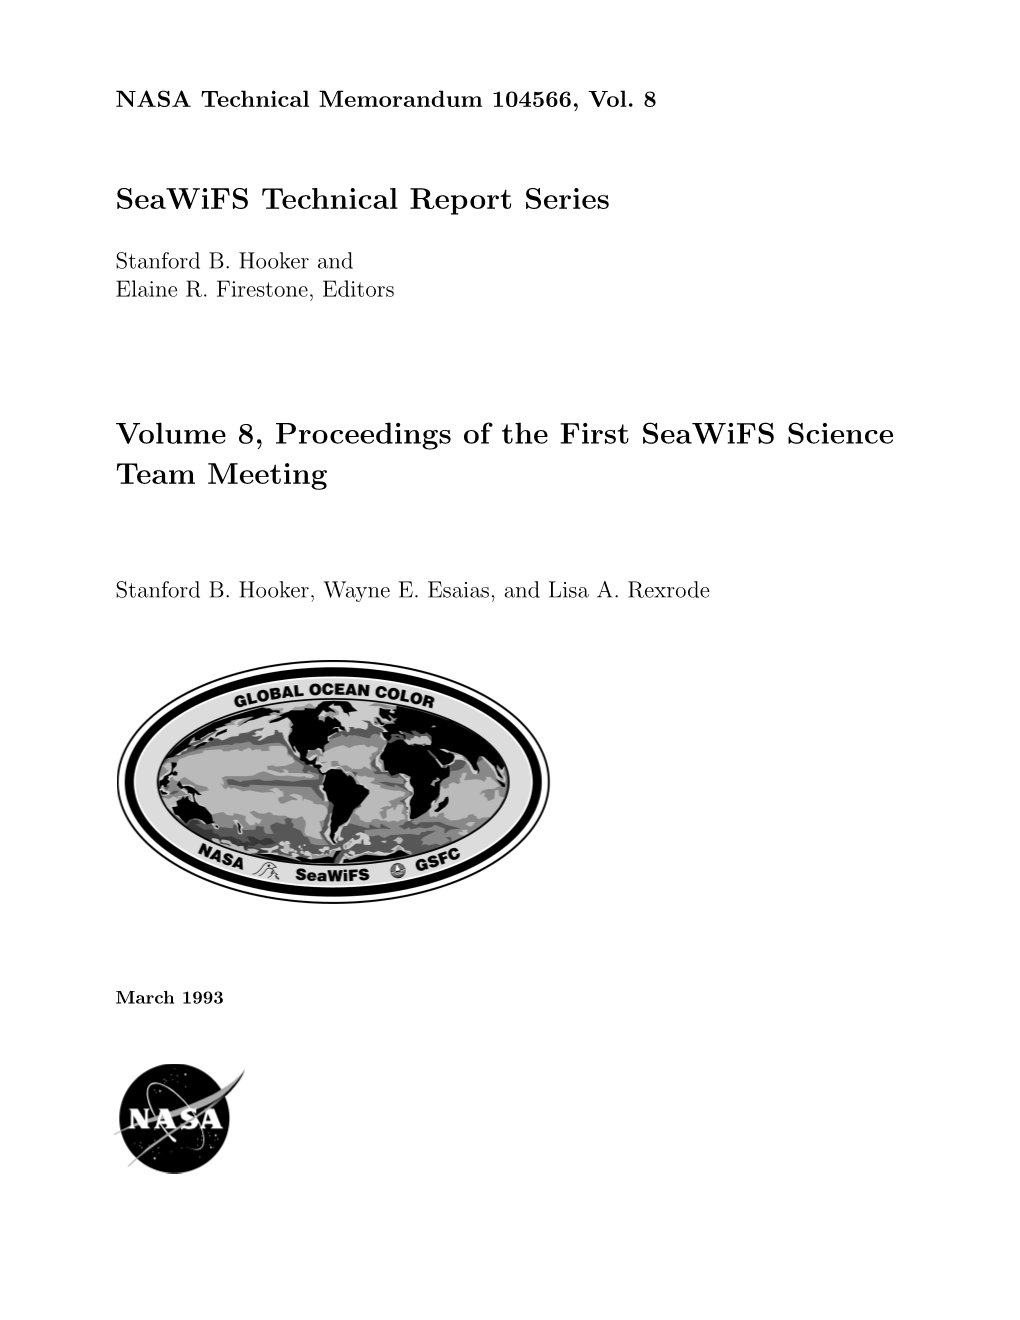 Seawifs Technical Report Series Volume 8, Proceedings of the First